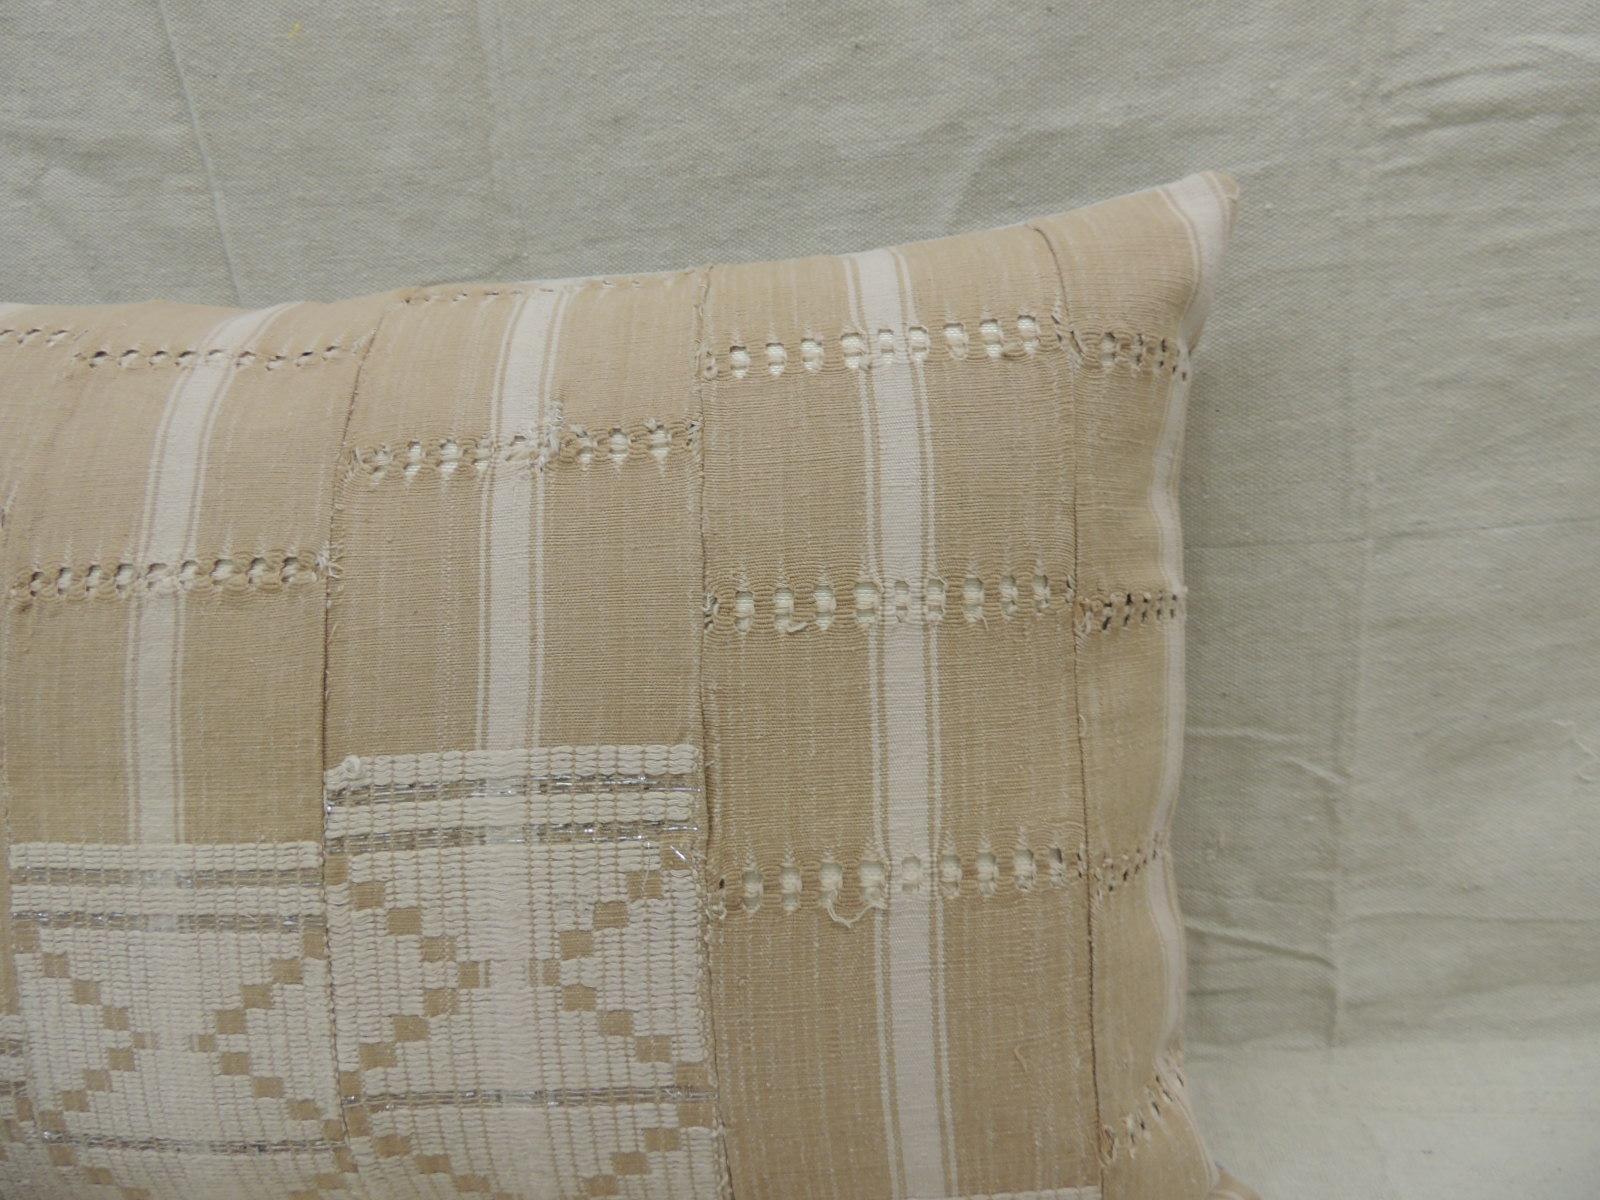 Tribal Vintage Tan and White Woven Ewe Stripweaves African Bolster Decorative Pillow